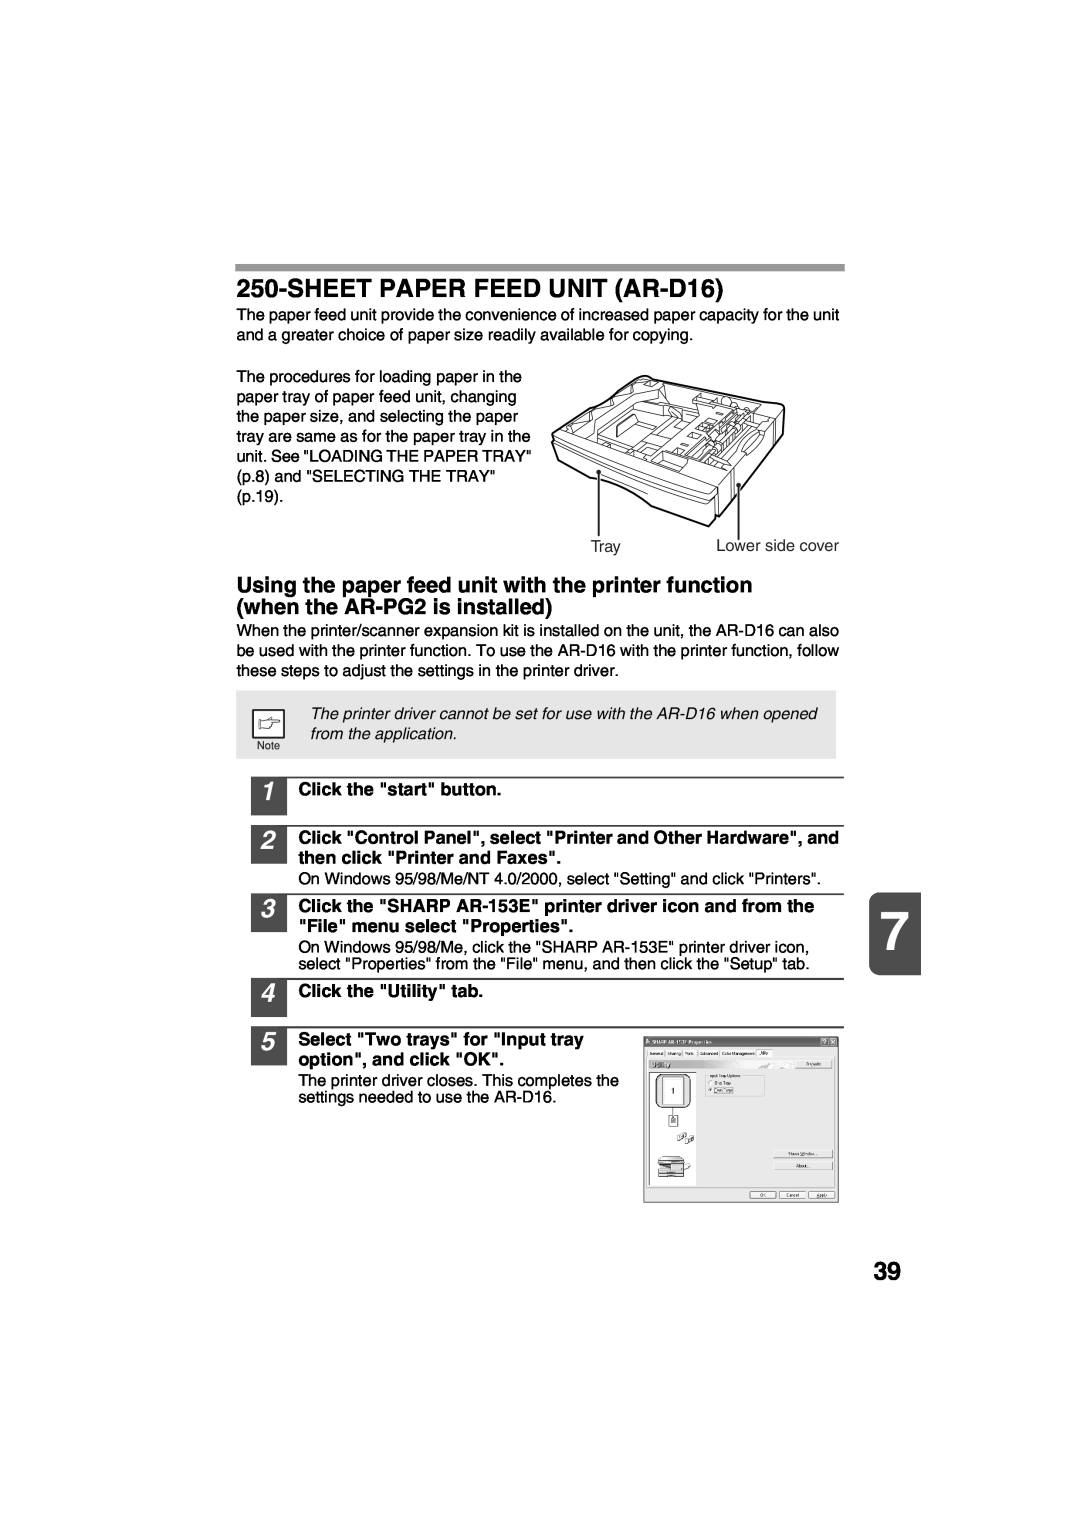 Sharp AR-157E SHEET PAPER FEED UNIT AR-D16, Click the start button, then click Printer and Faxes, Click the Utility tab 